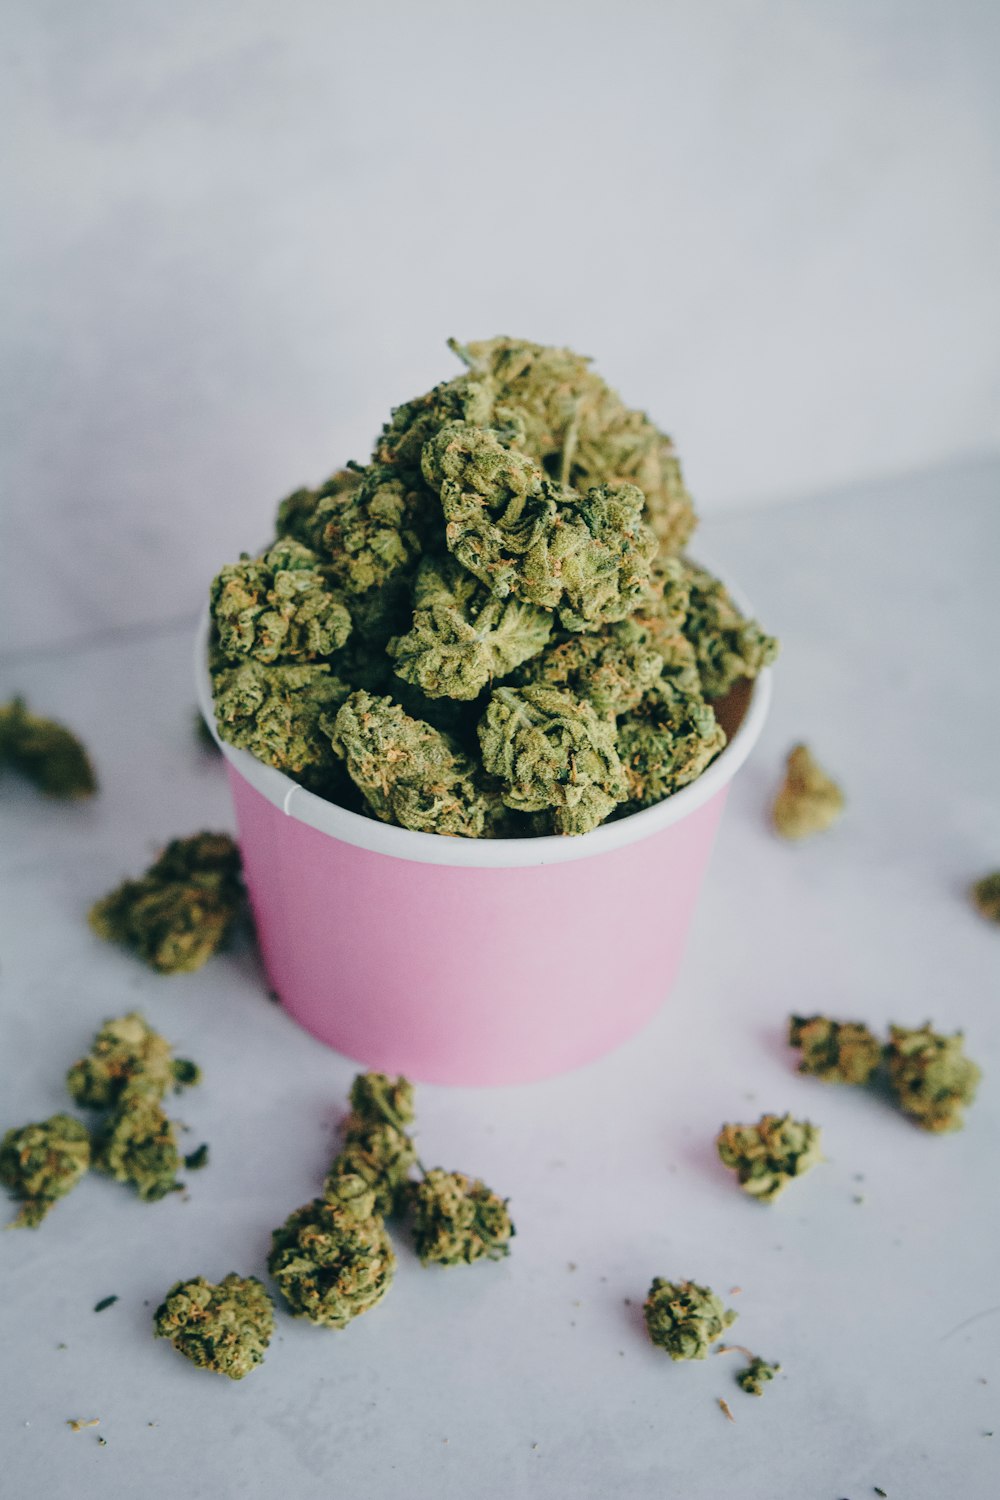 green kush in pink plastic cup